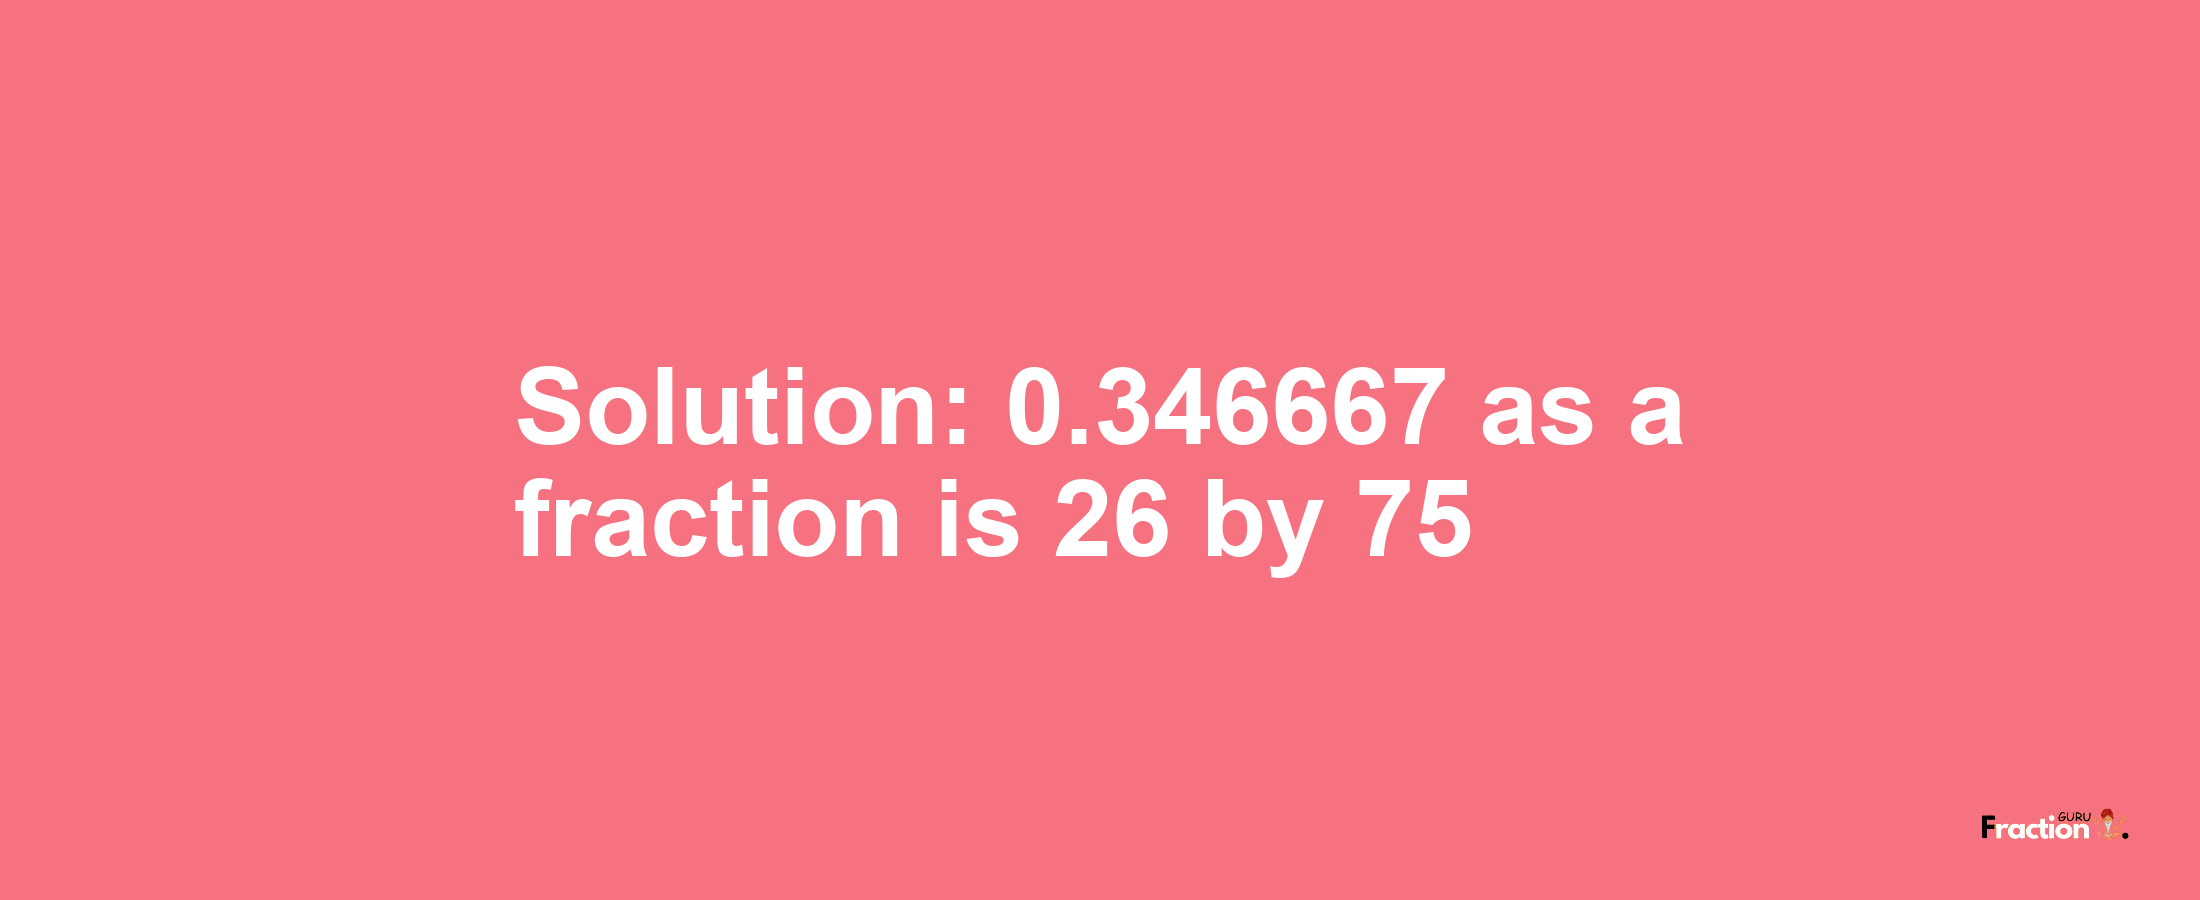 Solution:0.346667 as a fraction is 26/75